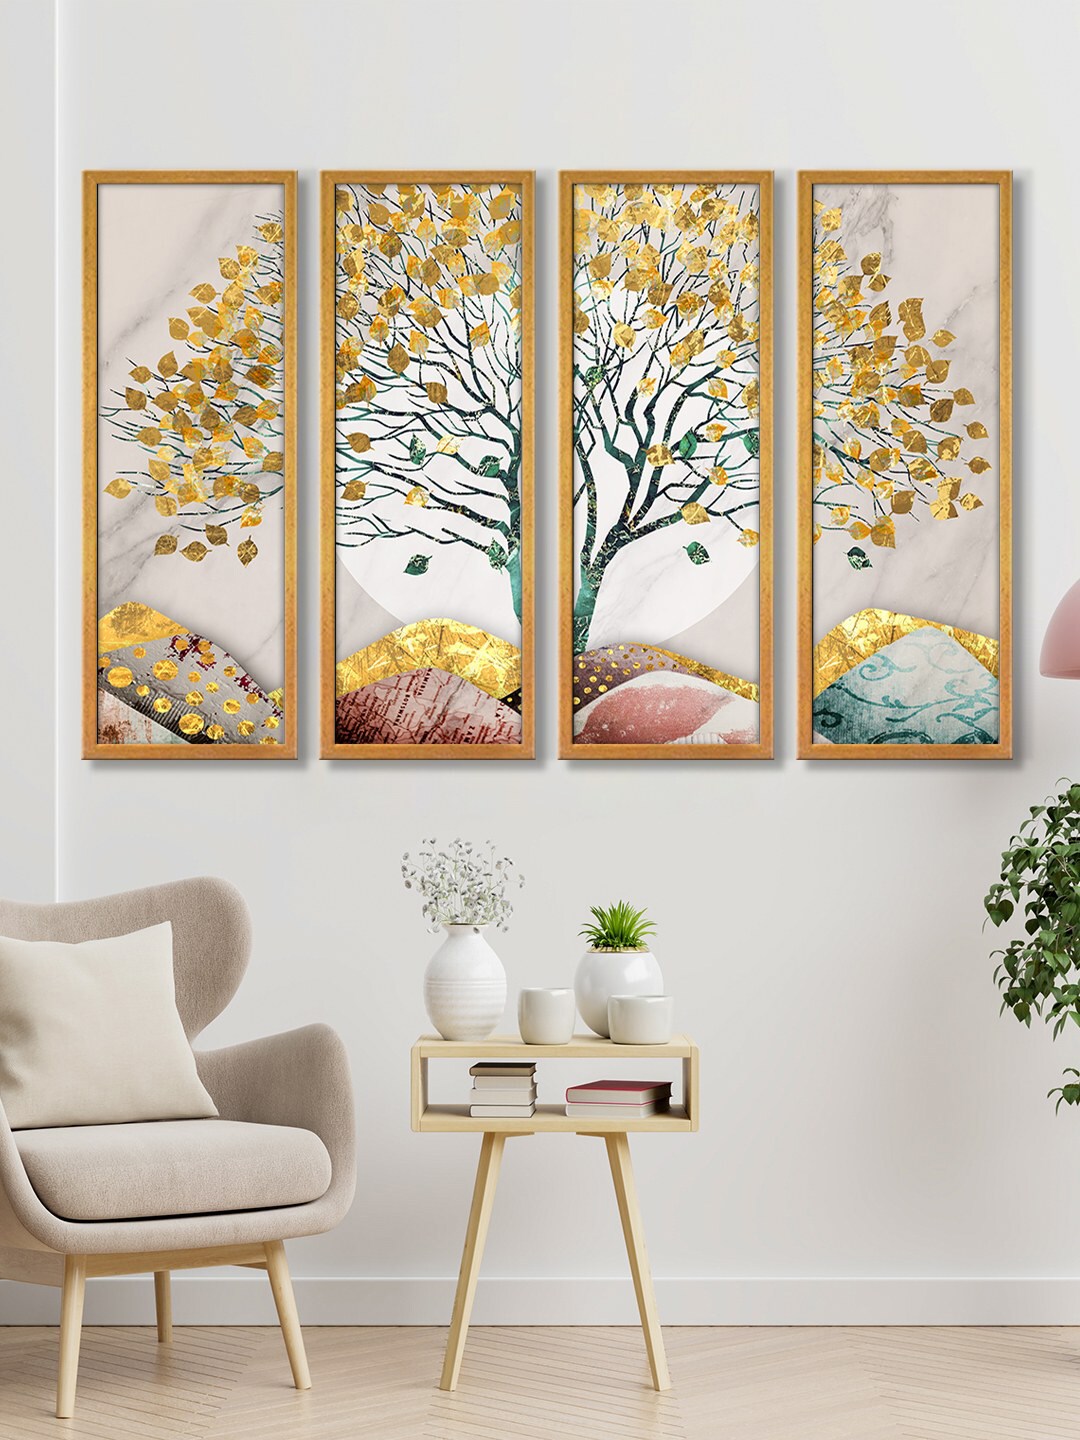 999Store Gold Set of 4 Tree With Stems Canvas Art Panels Price in India